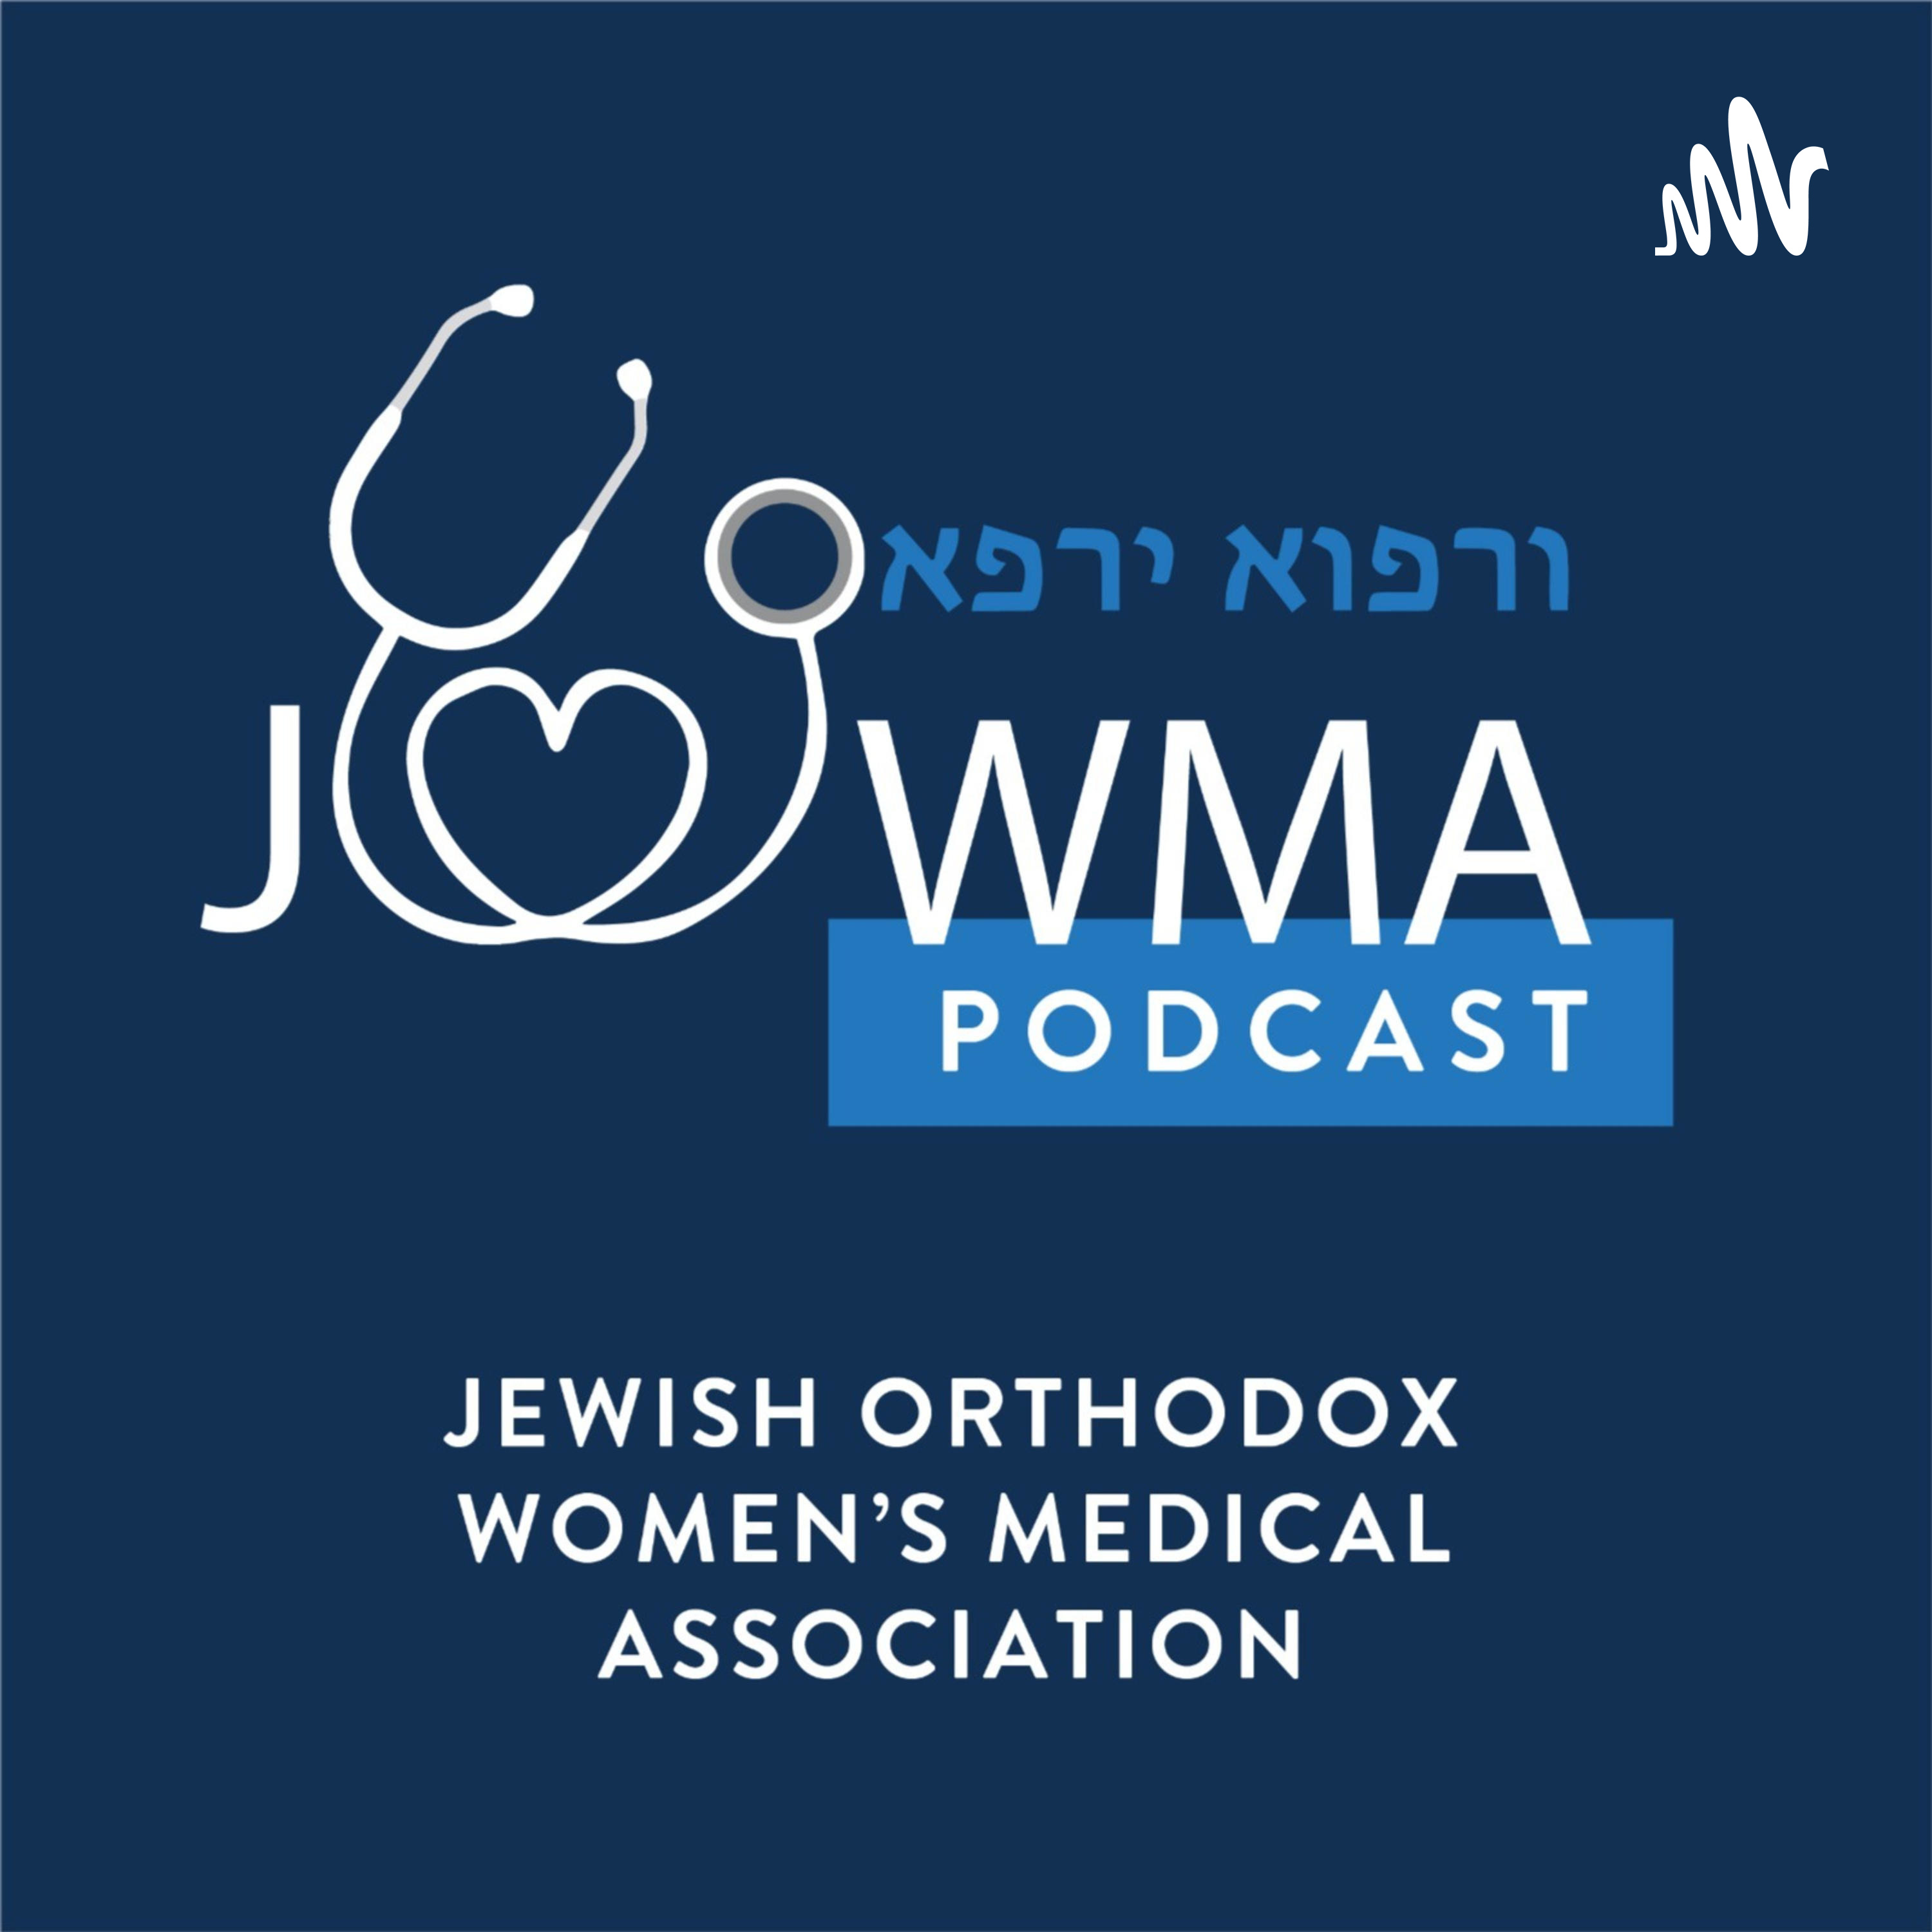 Answers to Community Questions about COVID19: East Hill Synagogue Medical Symposium